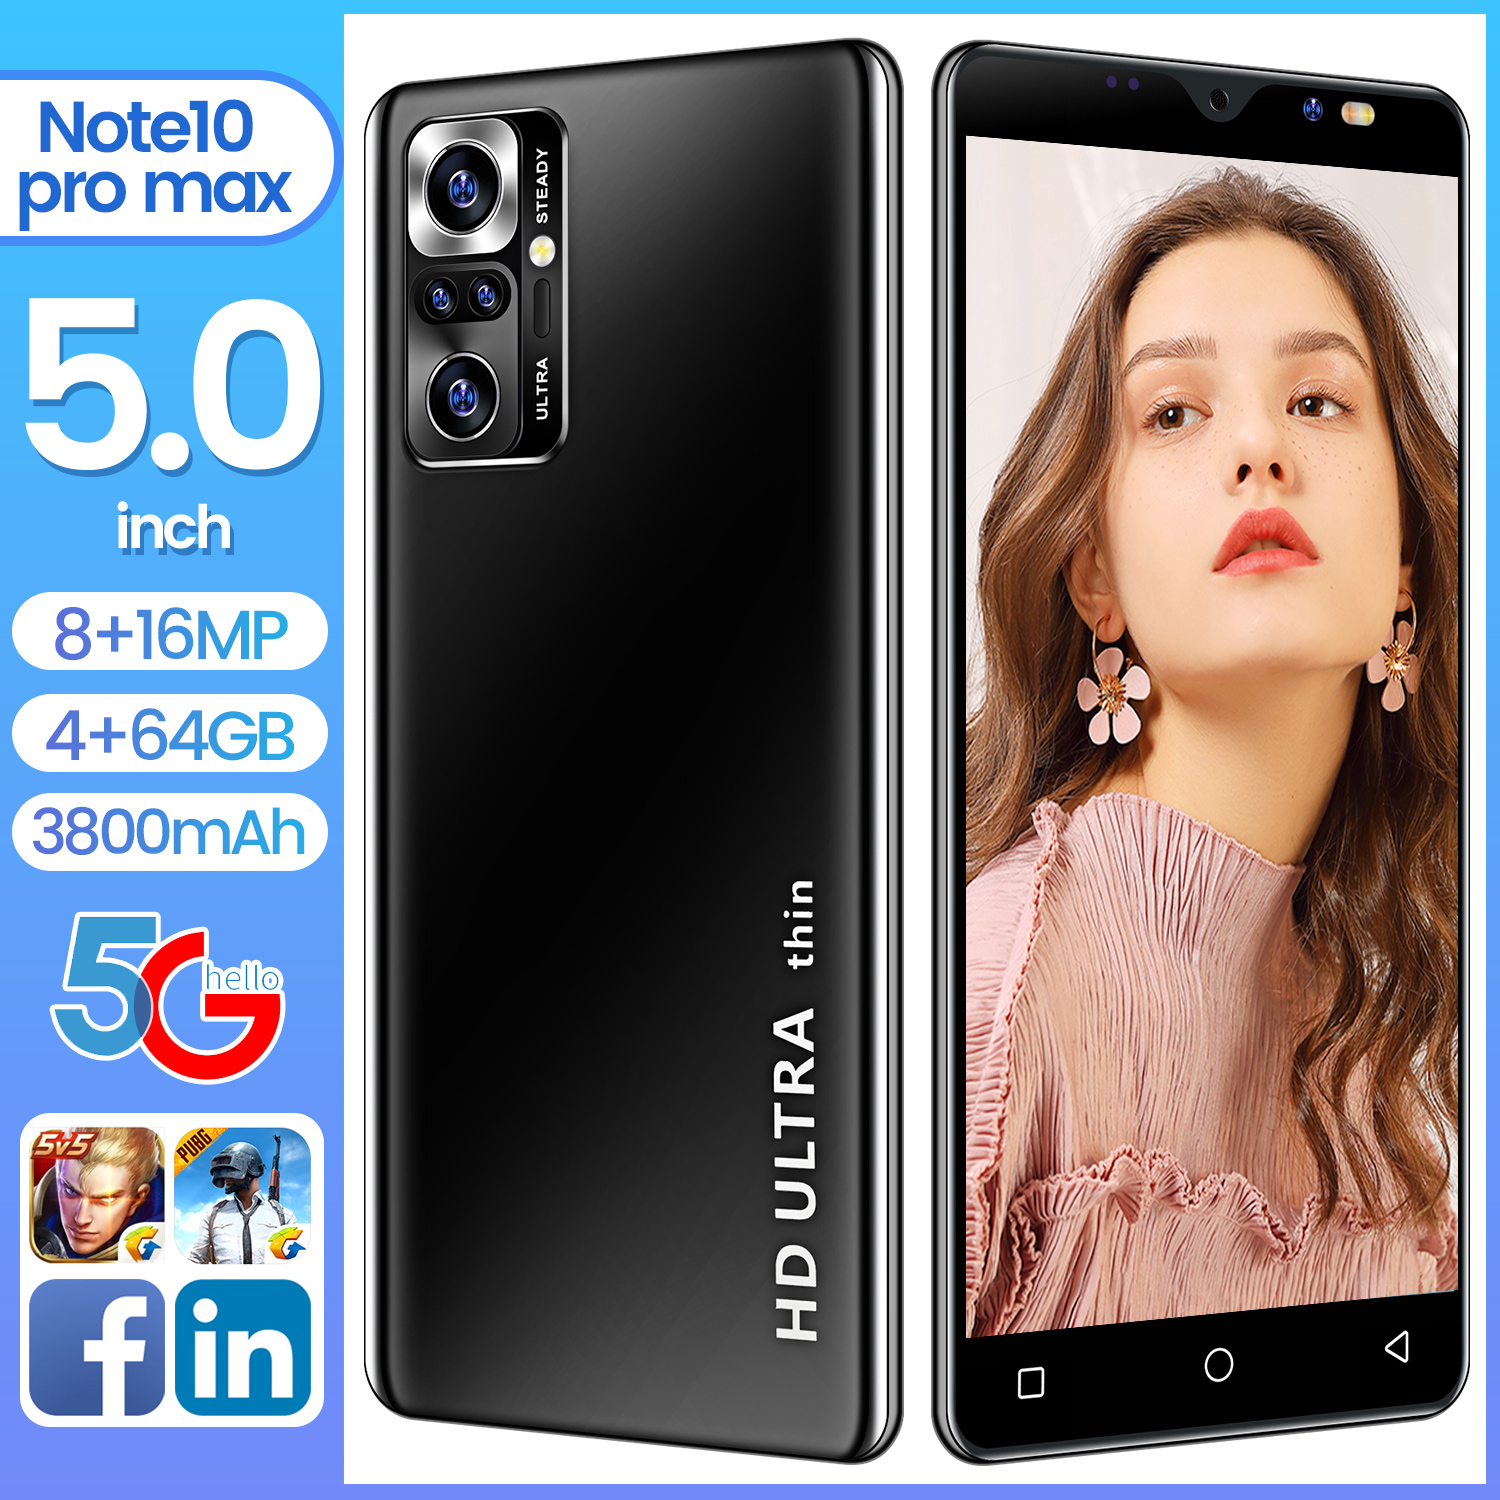 Note10 Android smartphone 5.0 inch high definition screen 3800mAh face recognition HD camera dual card android10.0 4 + 64GB